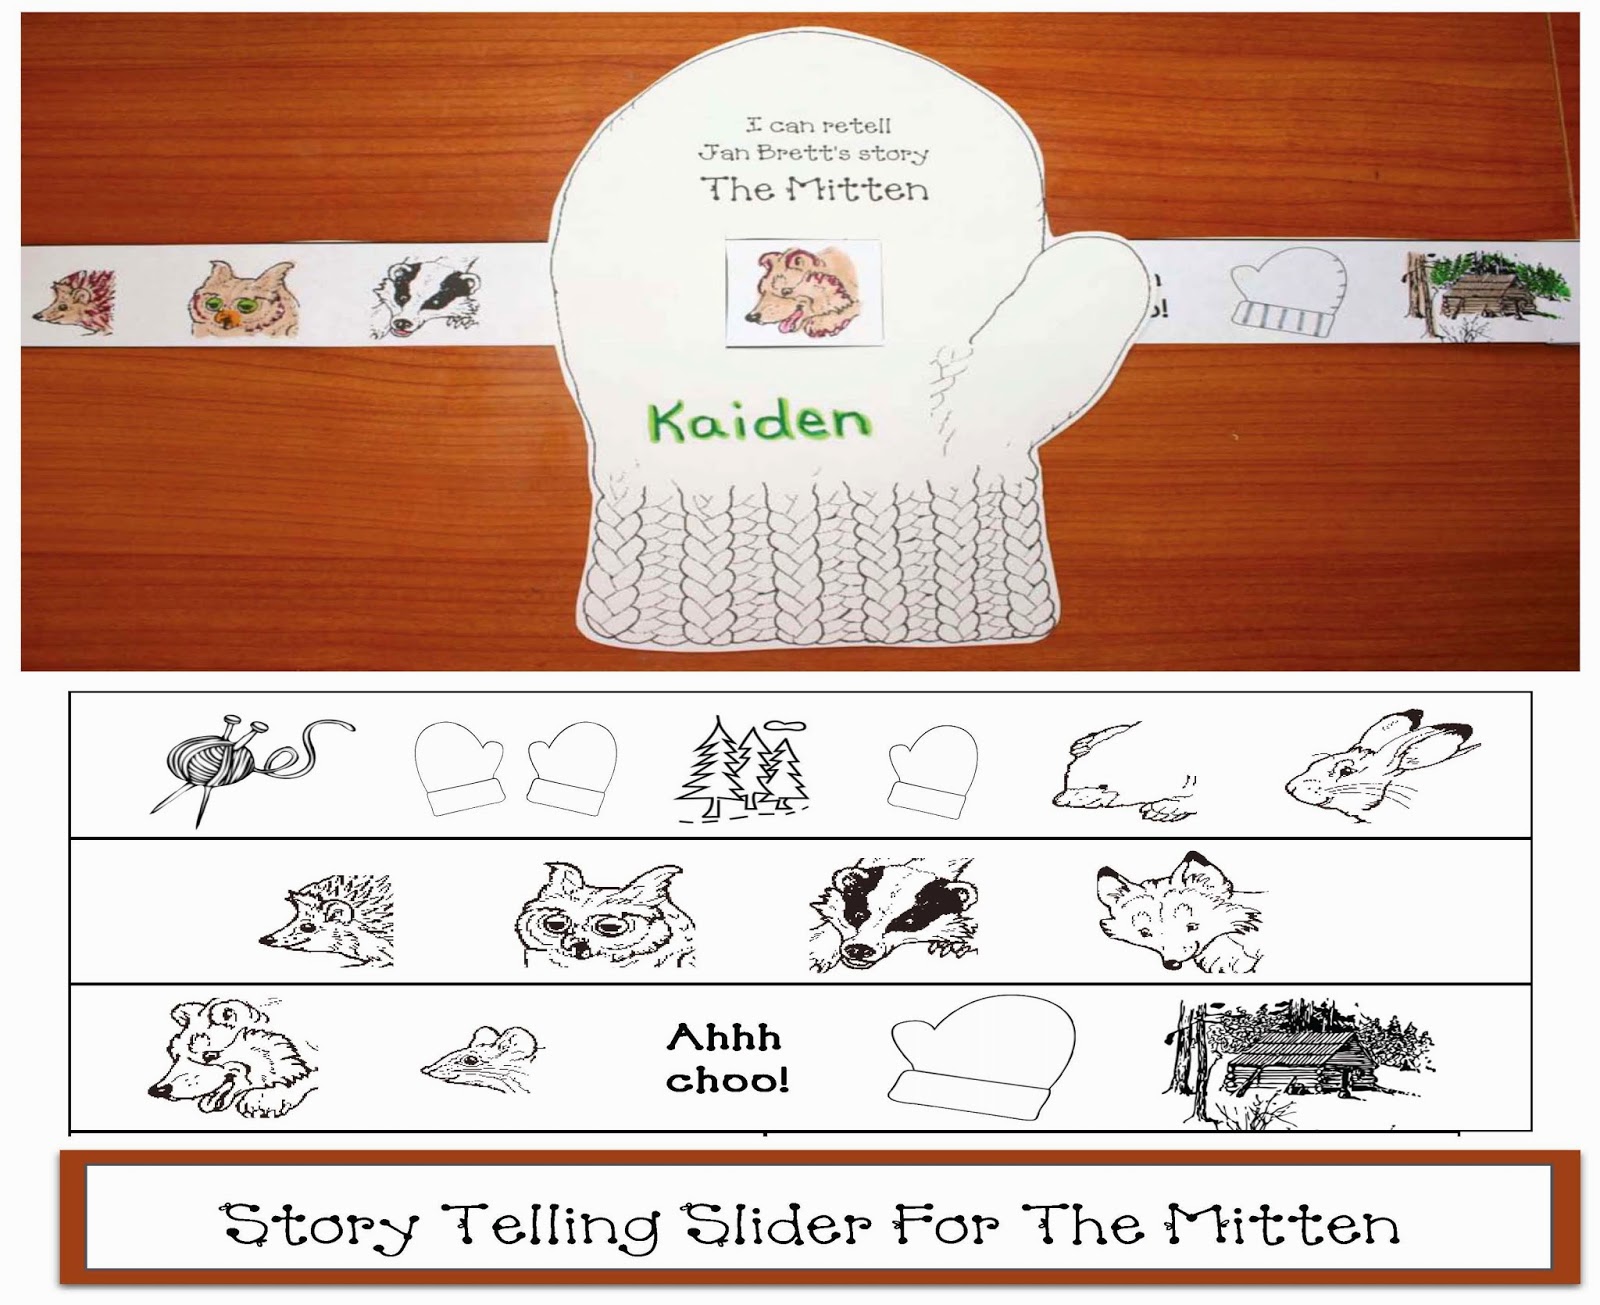 search-results-for-the-mitten-sequencing-worksheets-calendar-2015